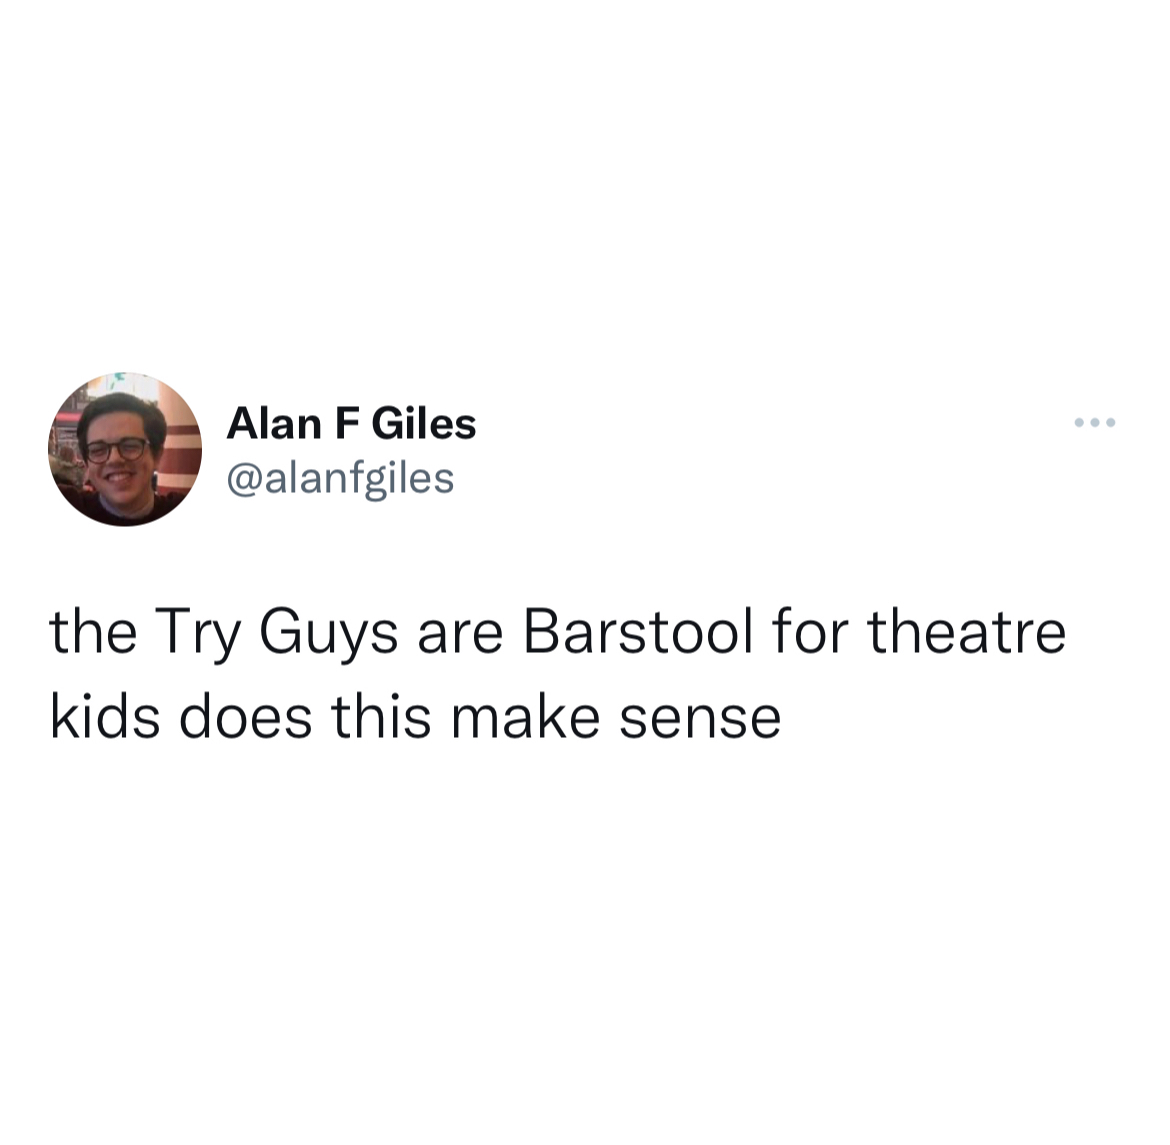 Savage Tweets - therapist friend meme - Alan F Giles the Try Guys are Barstool for theatre kids does this make sense